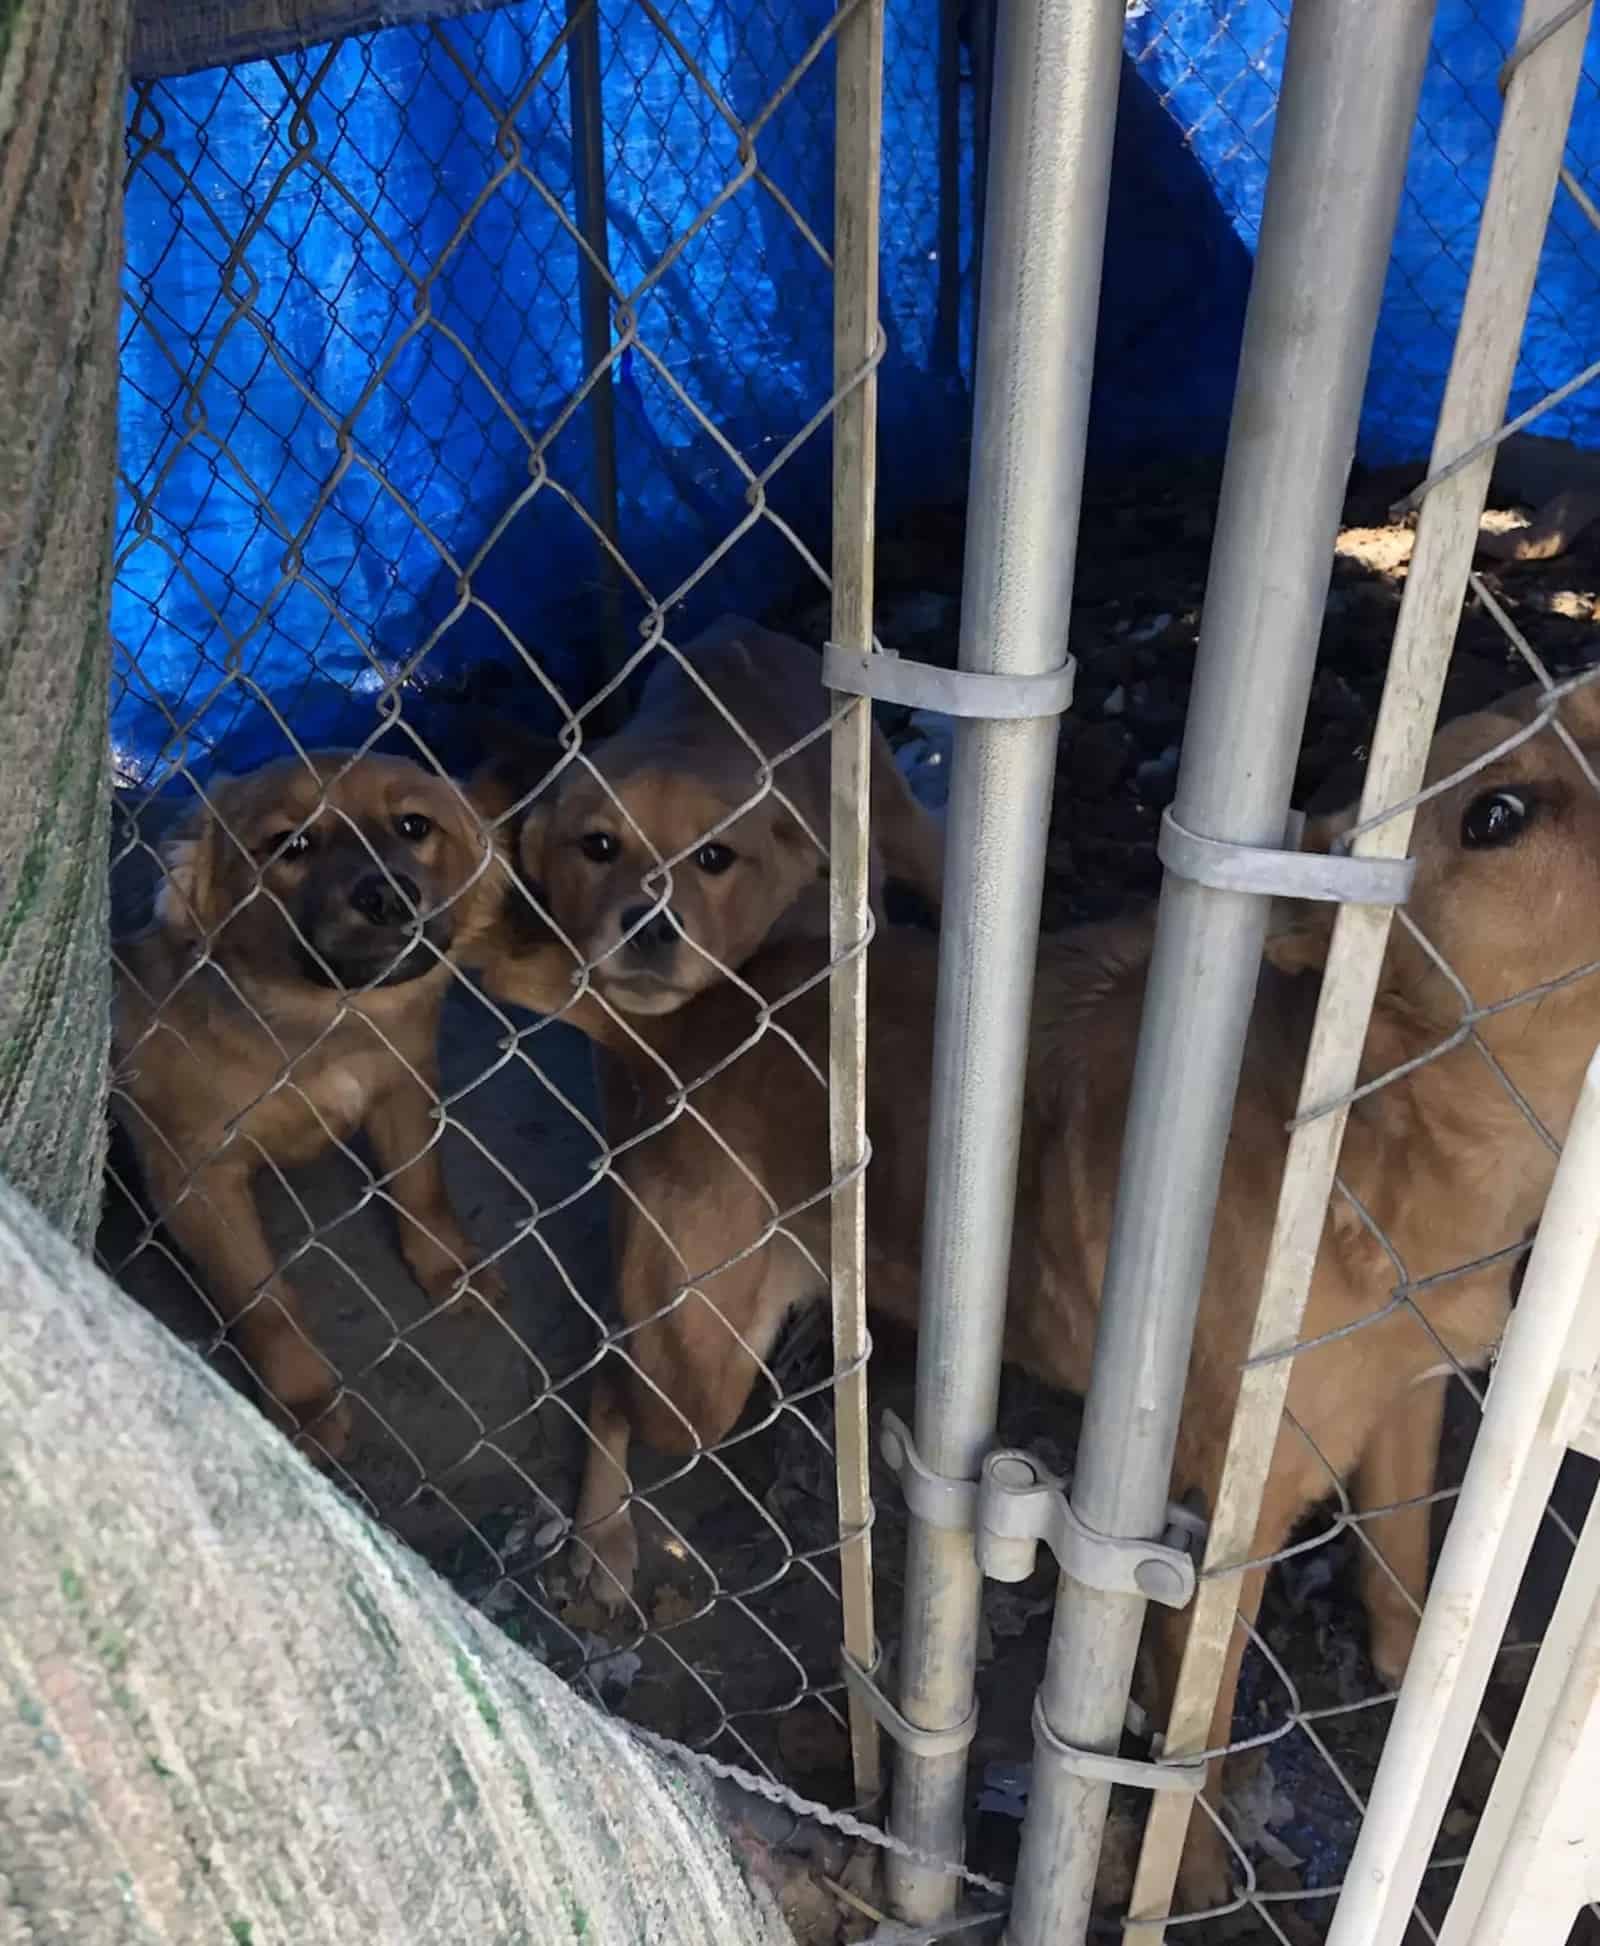 puppies in a cage in a filthy pen